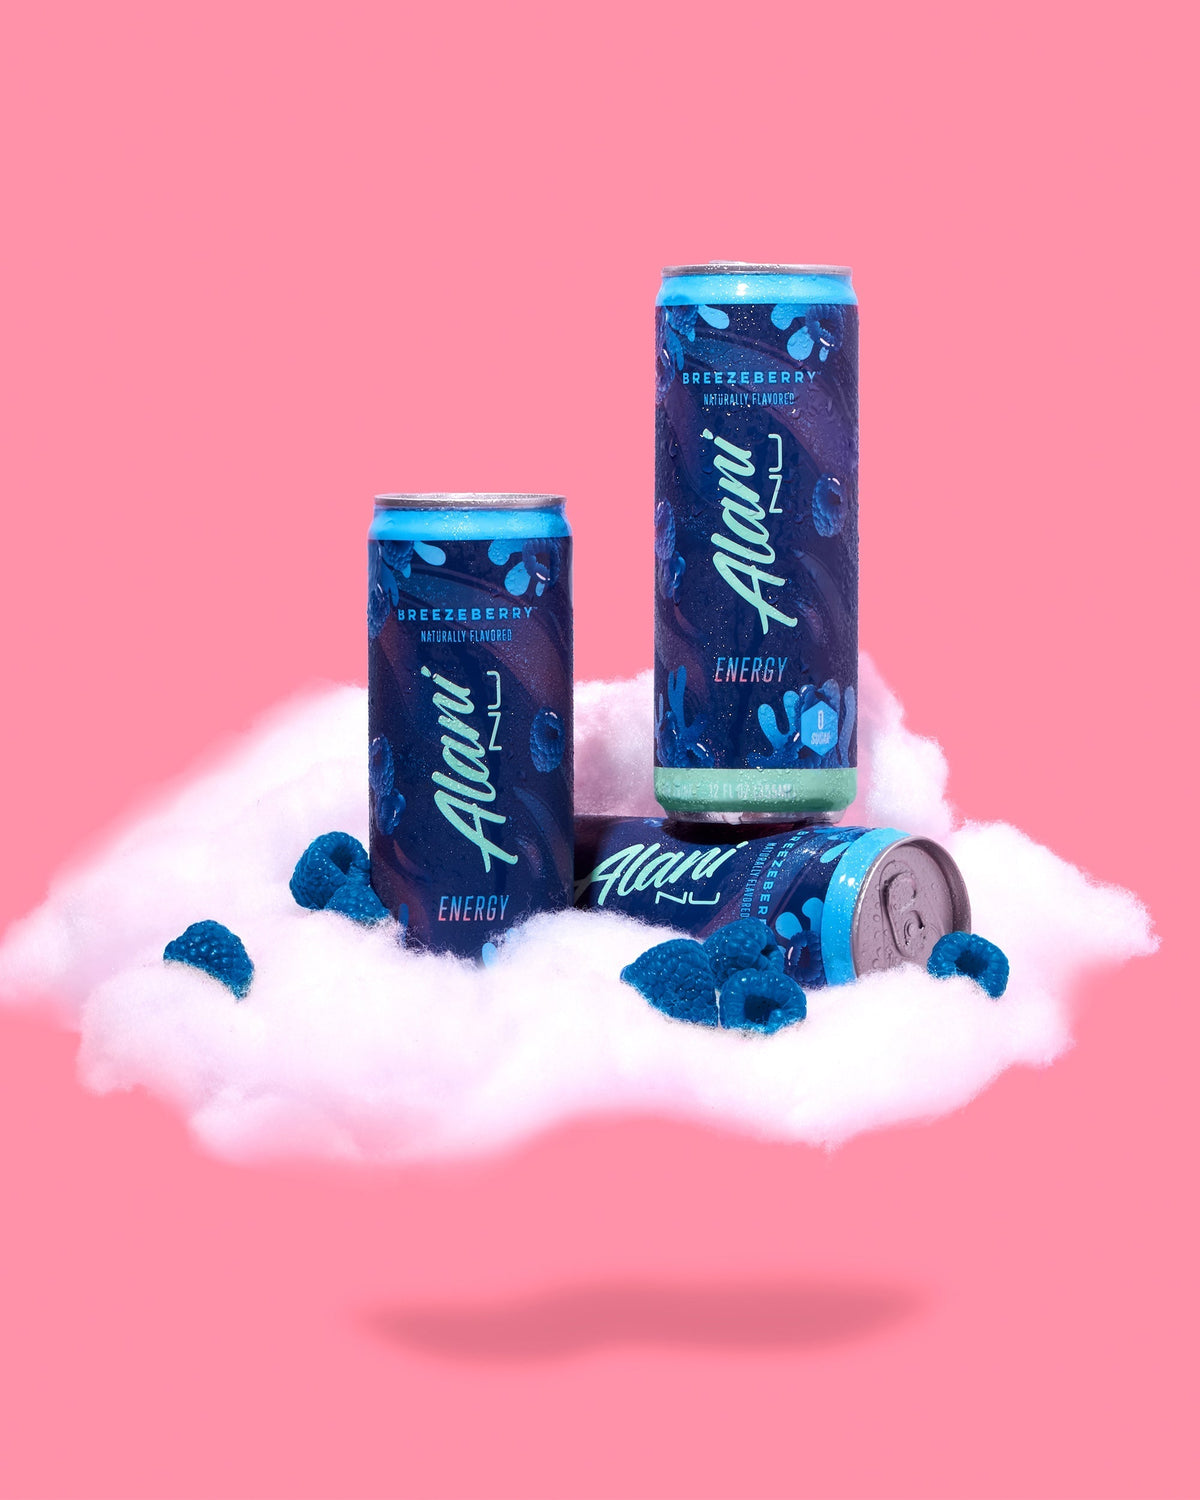 A couple of cans of Energy Drink in Breezeberry flavors sitting on top of a cloud.